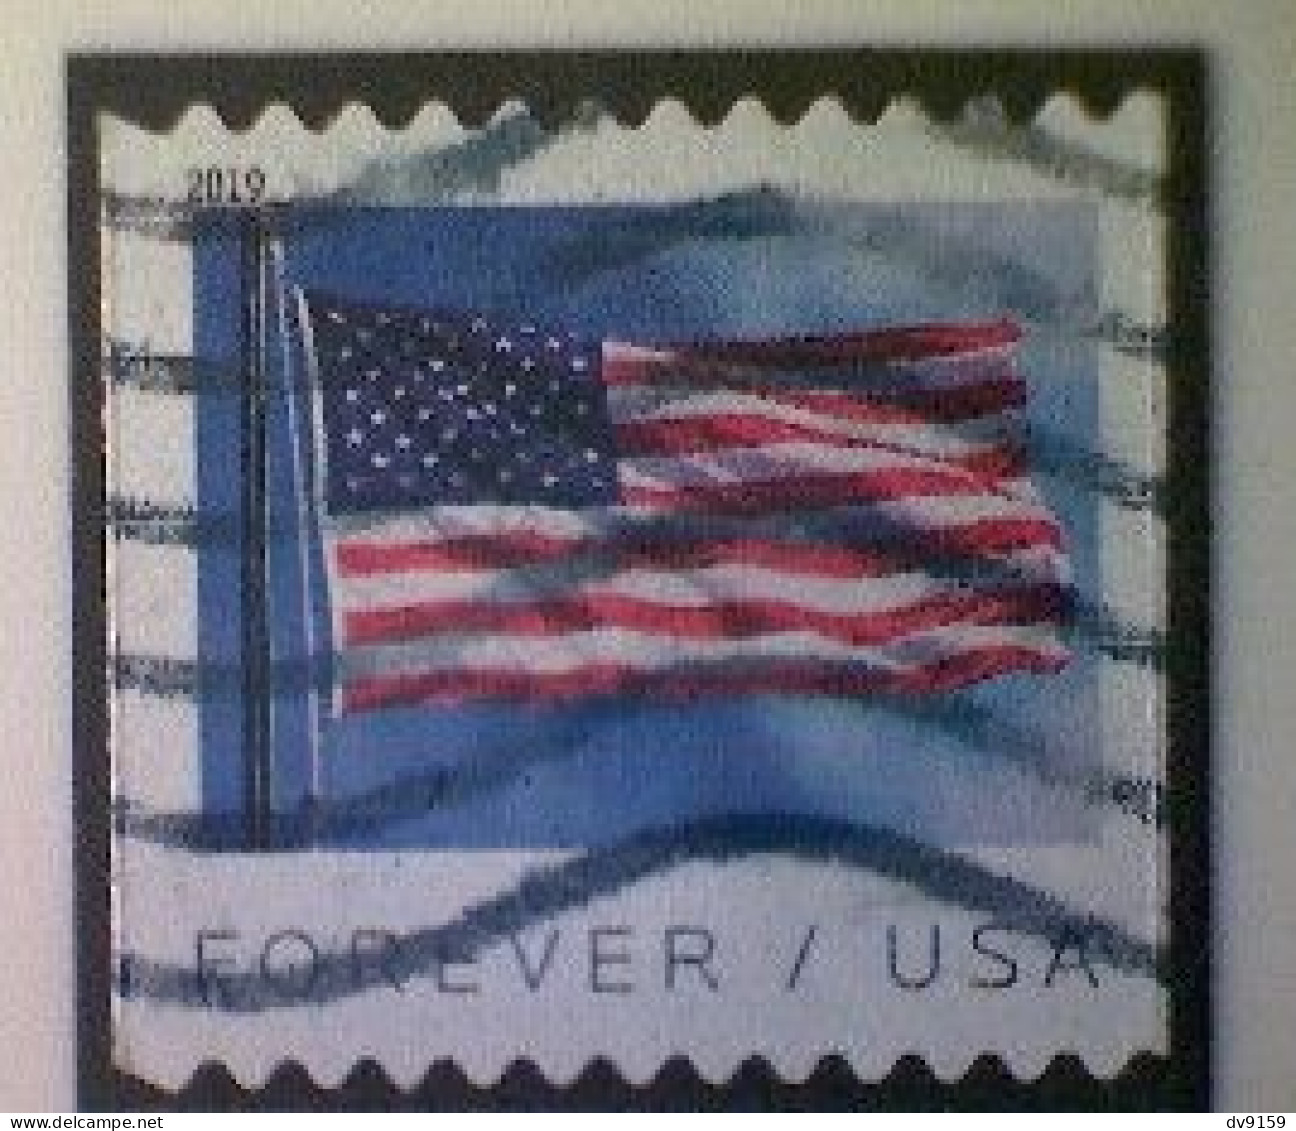 United States, Scott #5343, Used(o) Coil, 2019, Flag Definitive, (55¢) - Used Stamps